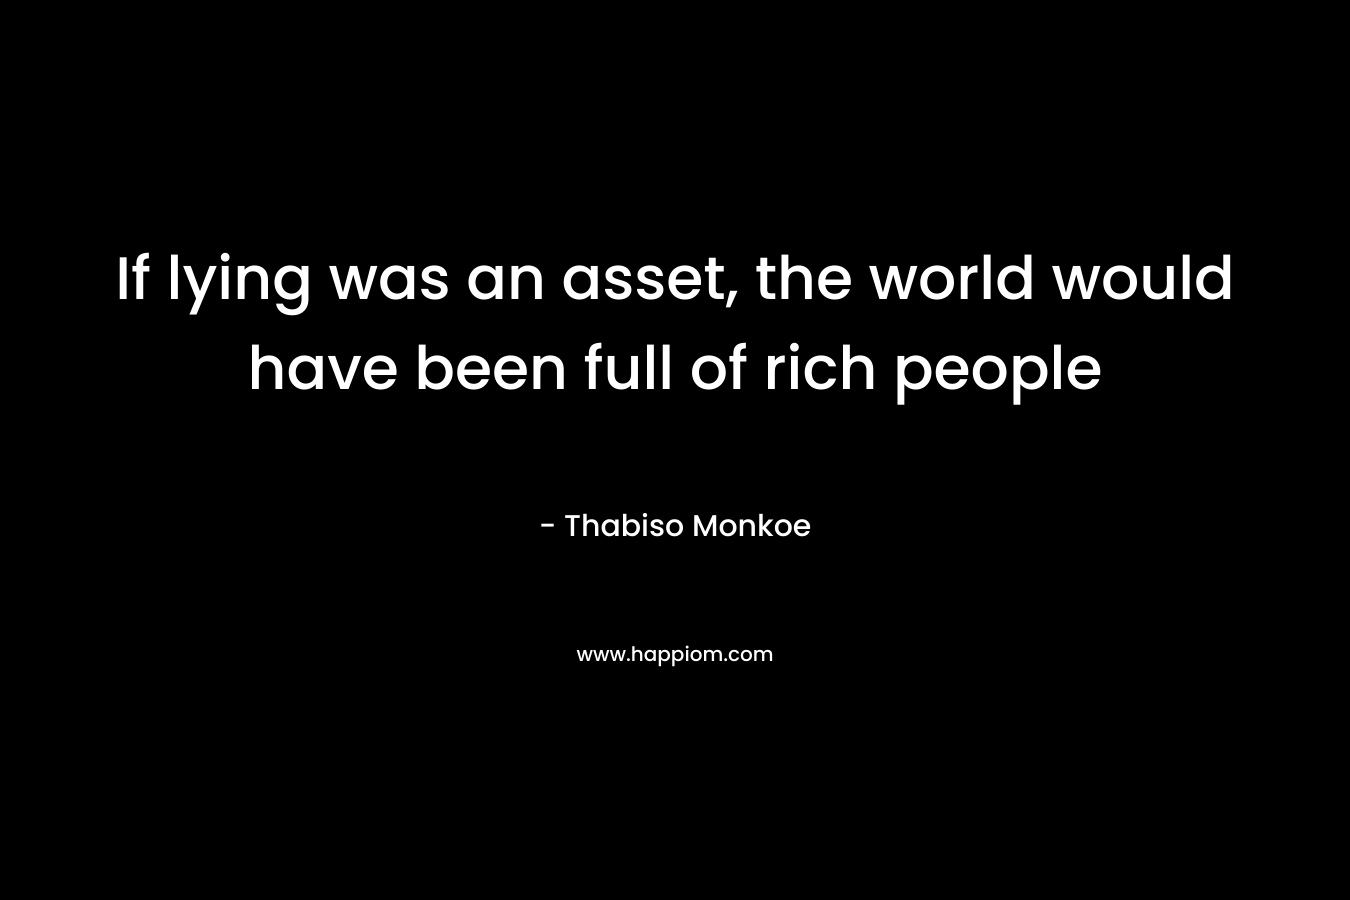 If lying was an asset, the world would have been full of rich people – Thabiso Monkoe